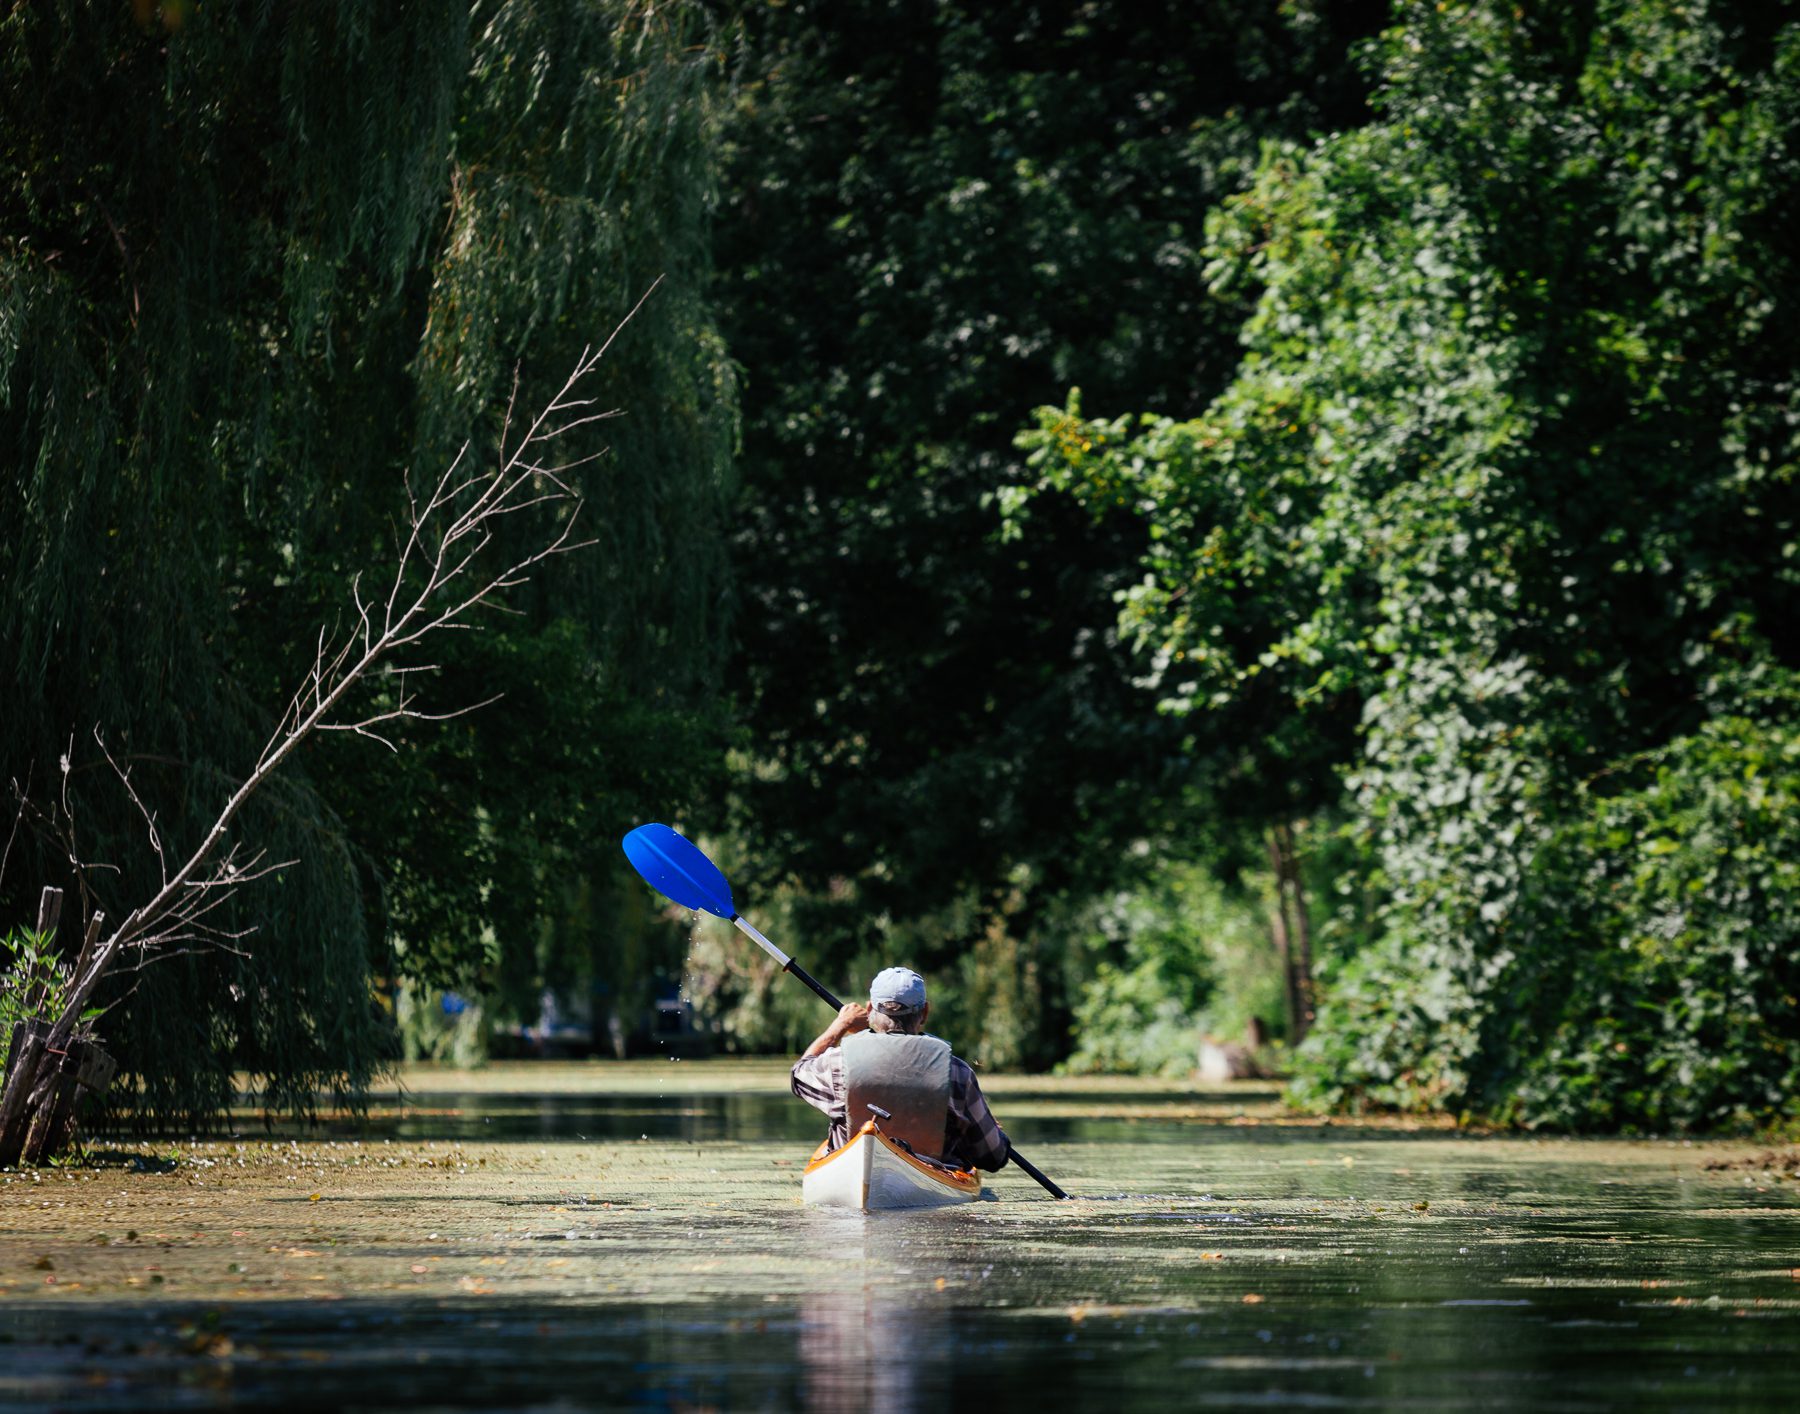 In less than a five-minute walk with his kayak on wheels, Ken can get from his house to Sterling Creek, where he launches to get out into the lake.